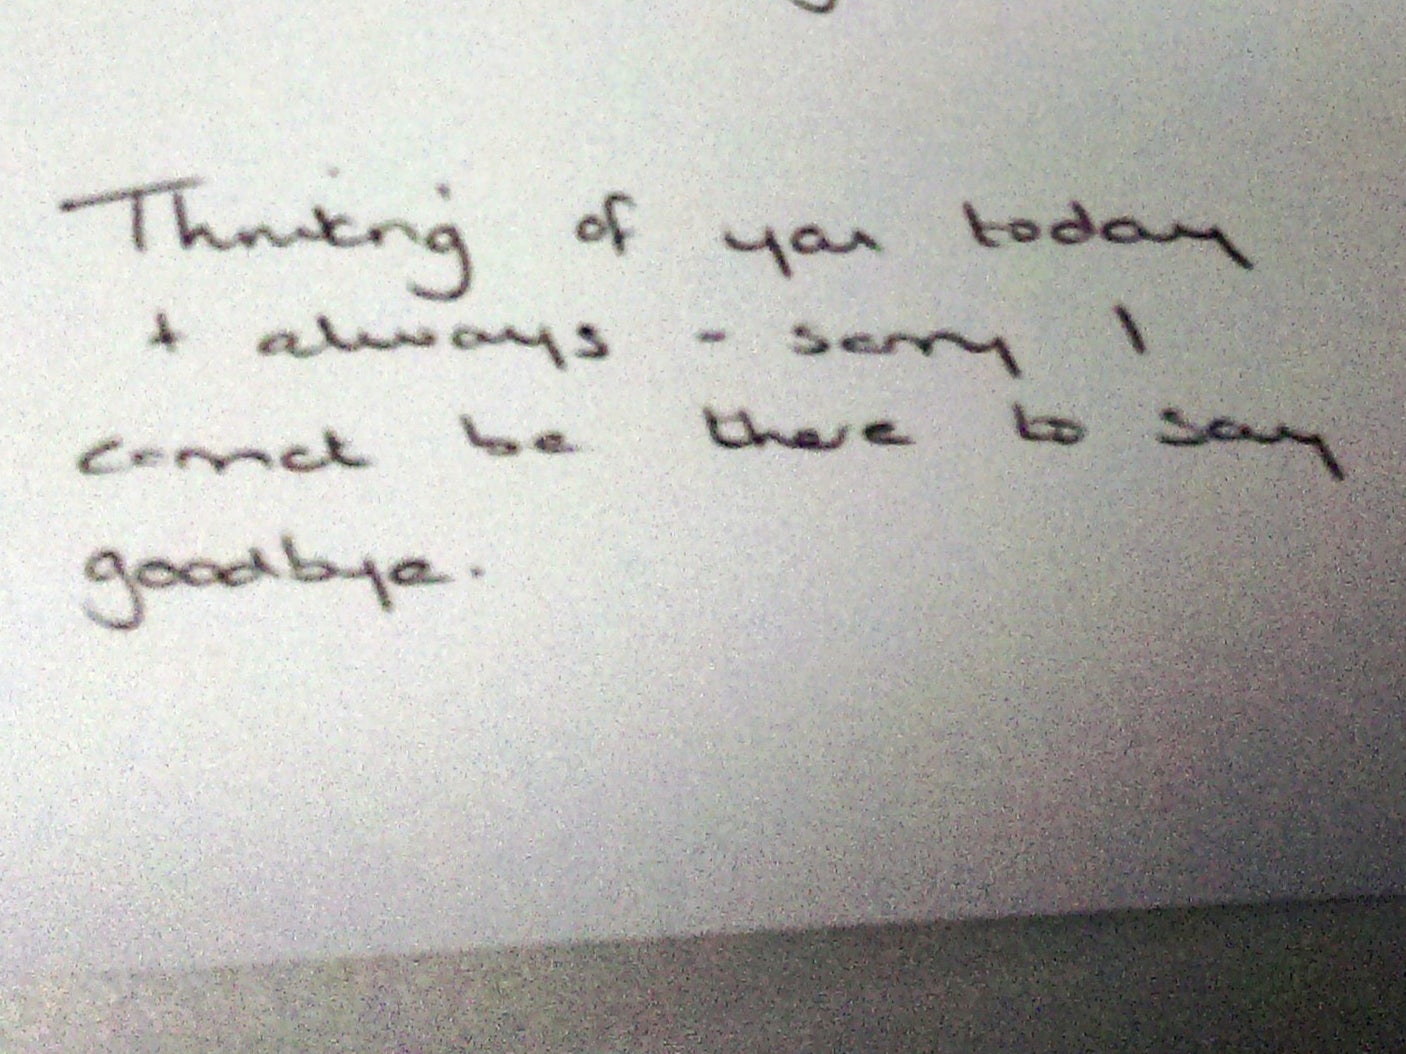 A sympathy card Letby wrote to the parents of one of her victims